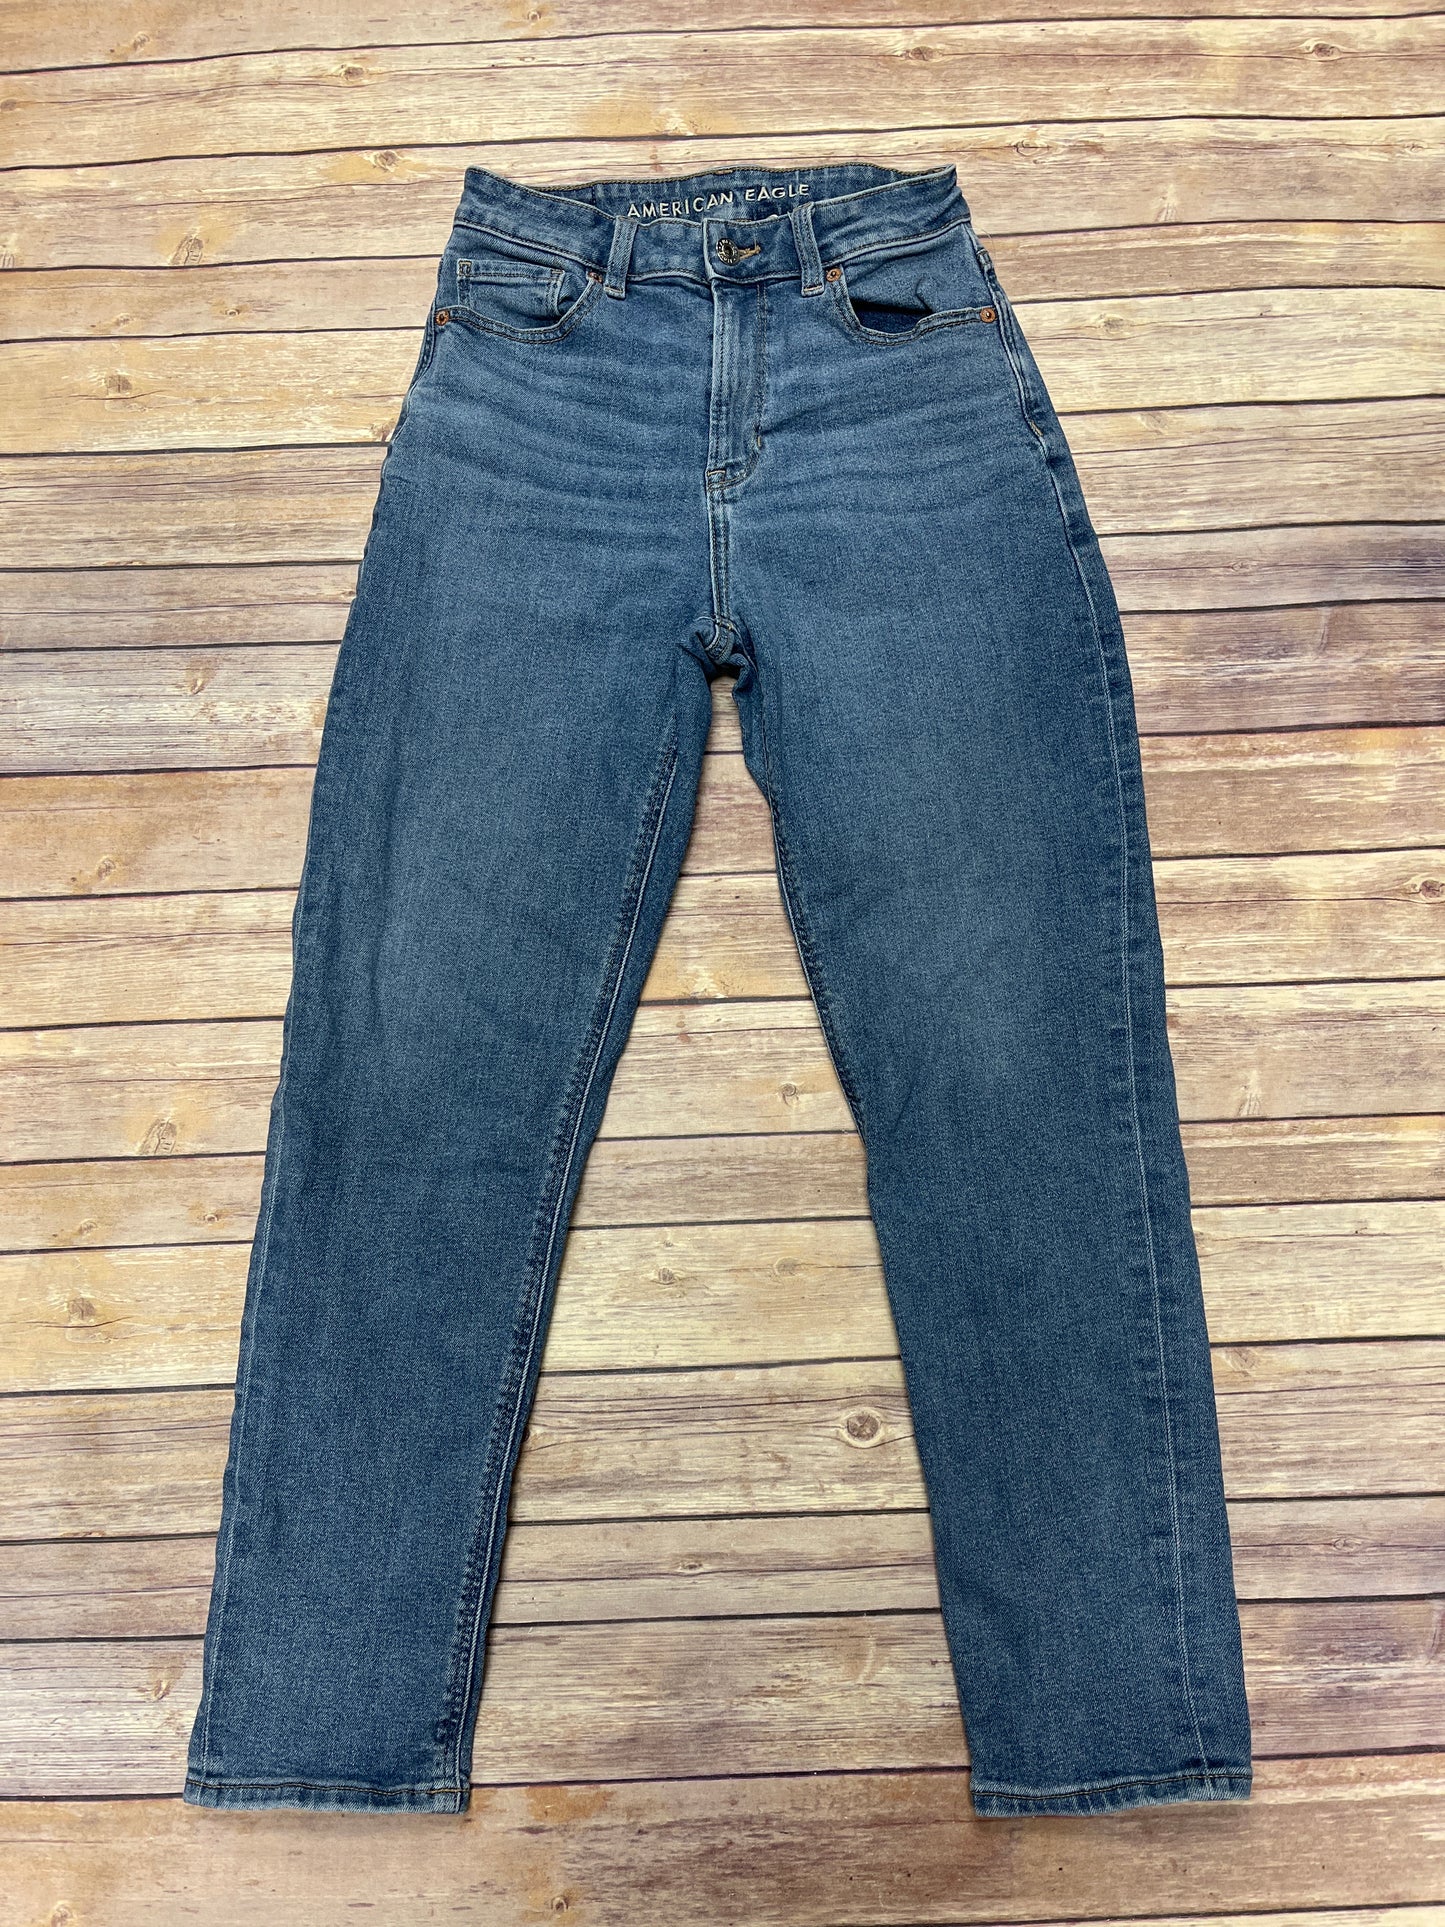 Jeans Relaxed/boyfriend By American Eagle  Size: 2